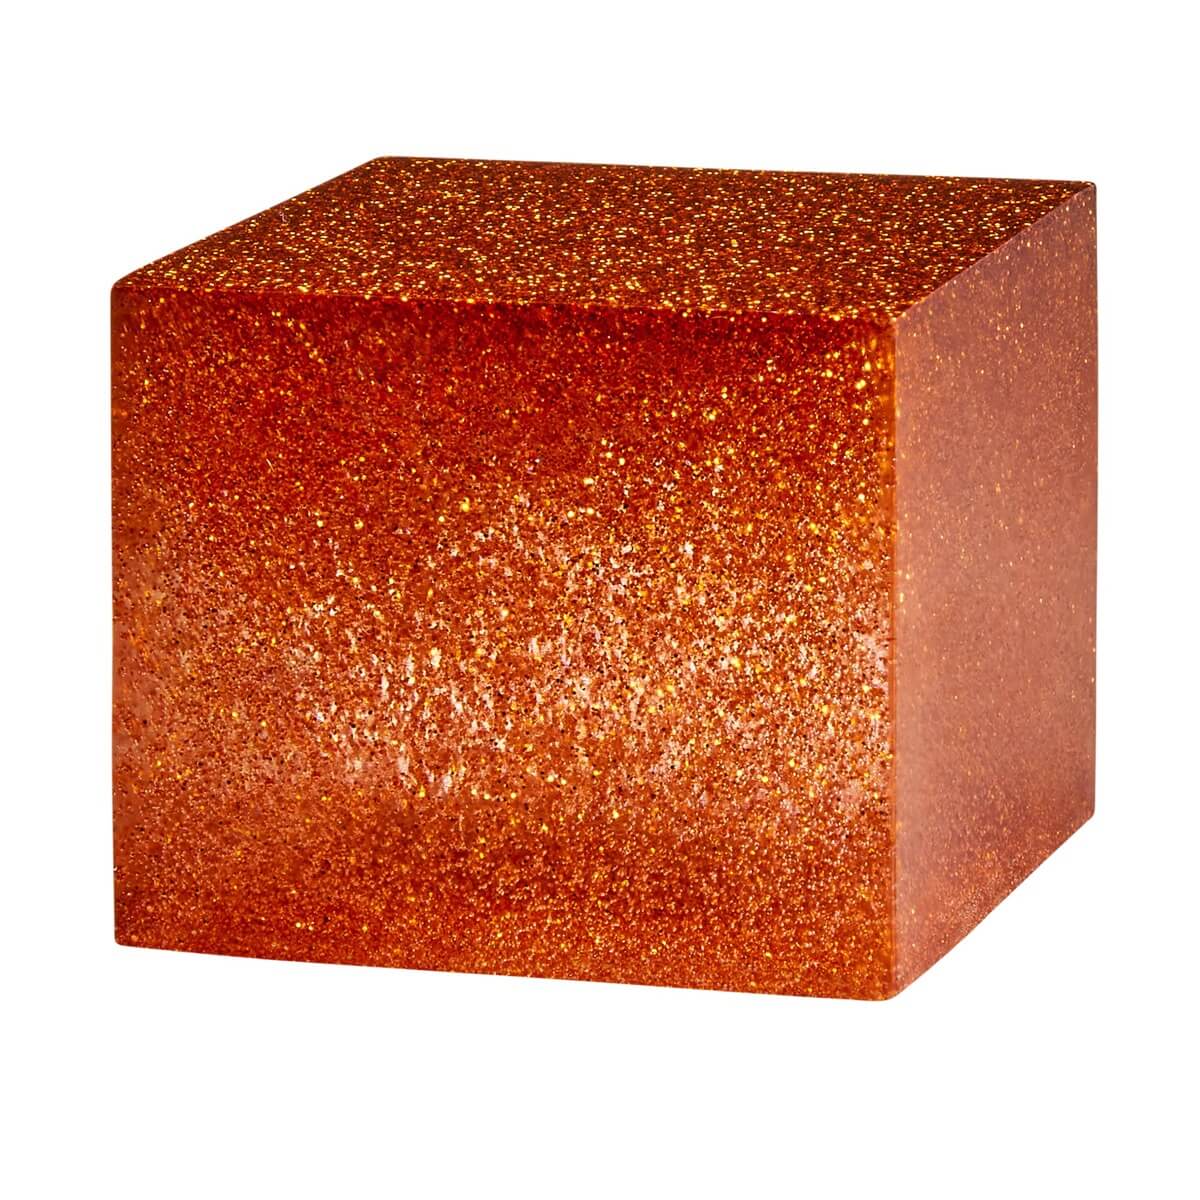 A resin cube made with the Bronze Glitter Mica Powder Pigment by Pigmently.